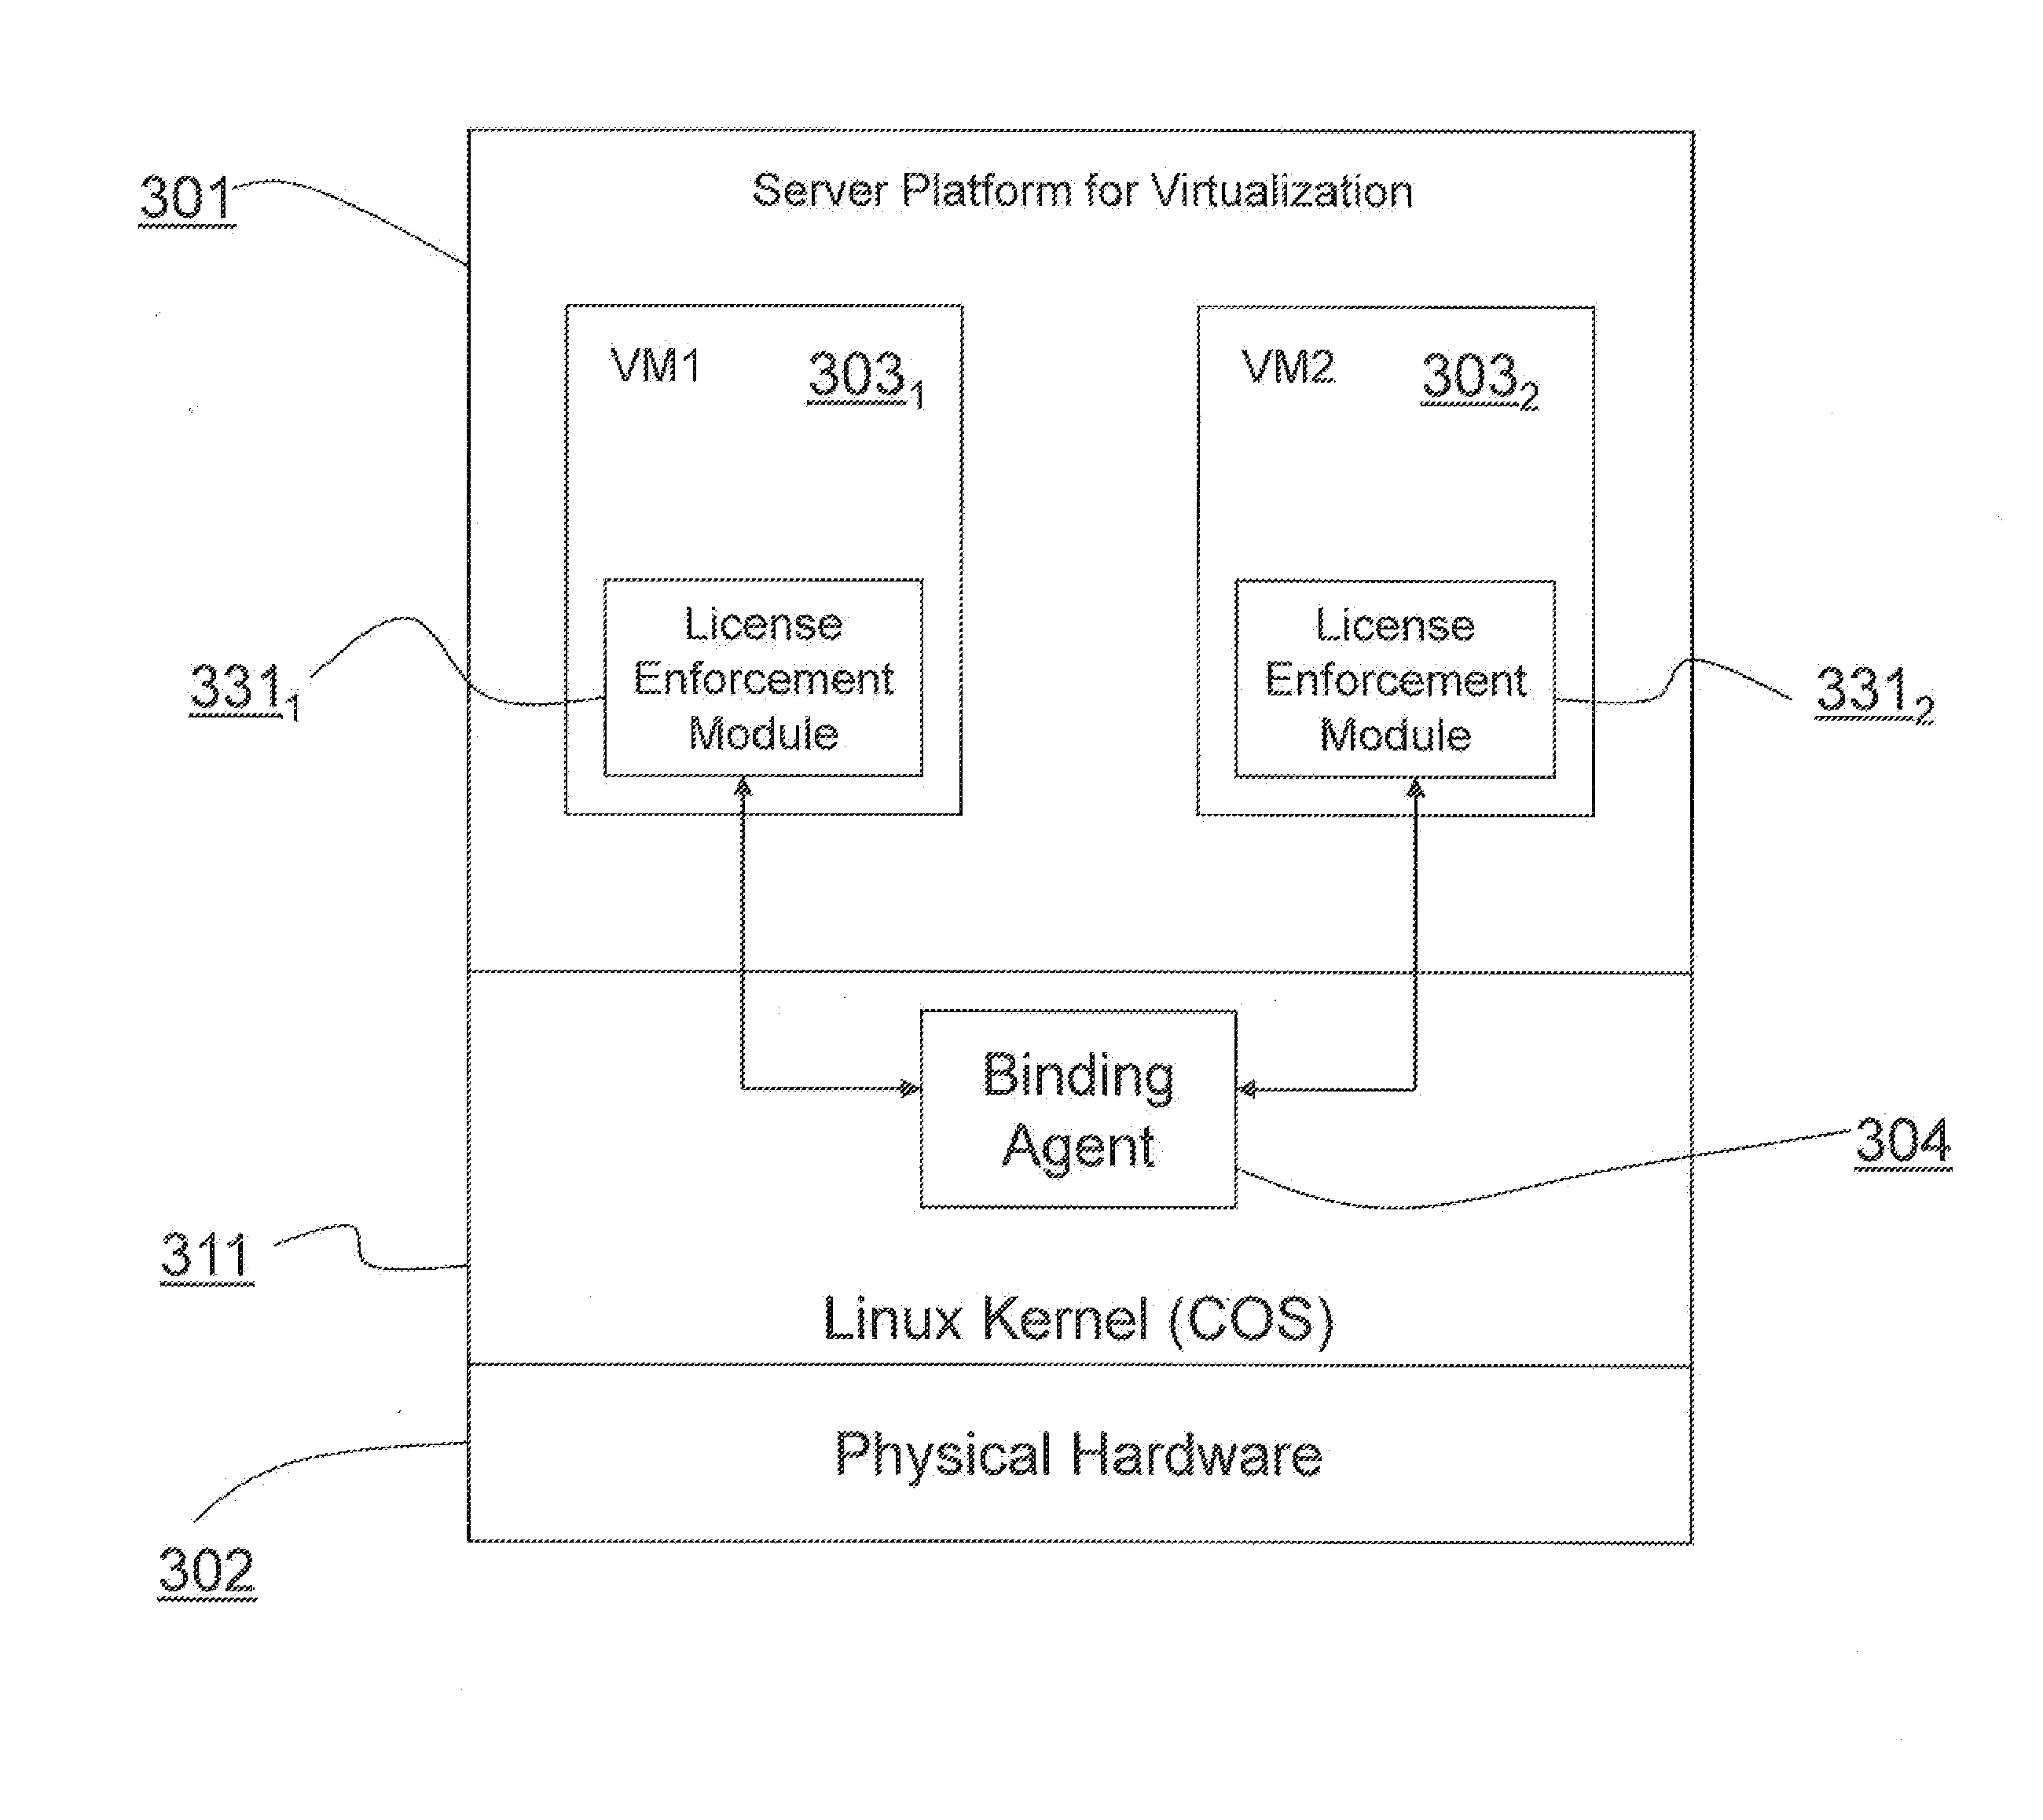 Method and System for Software Licensing Under Machine Virtualization